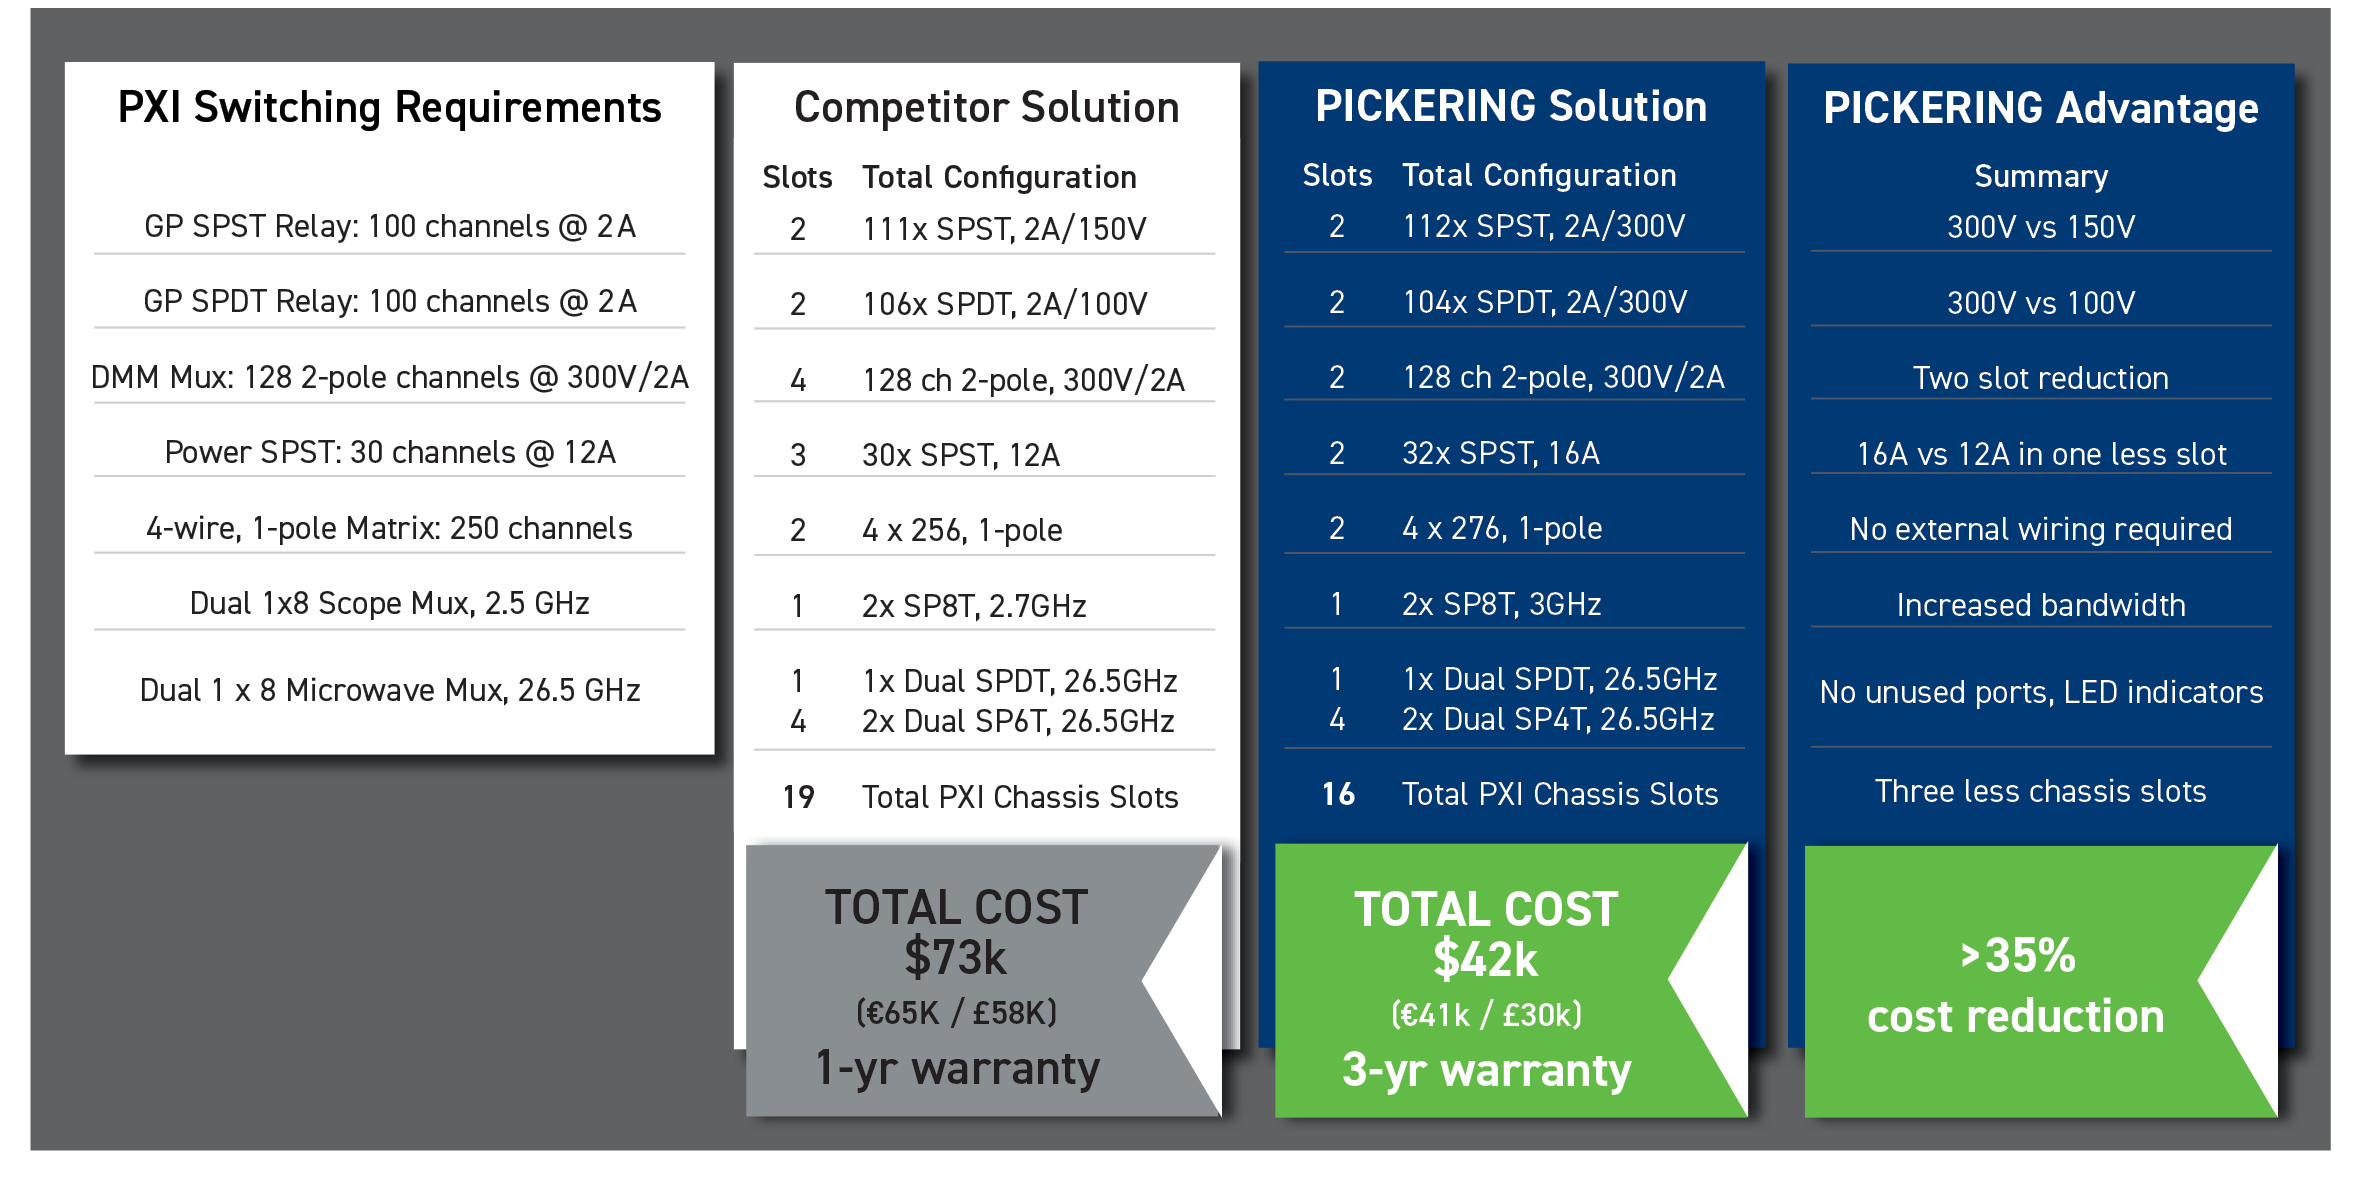 PXI switching subsystem savings from Pickering